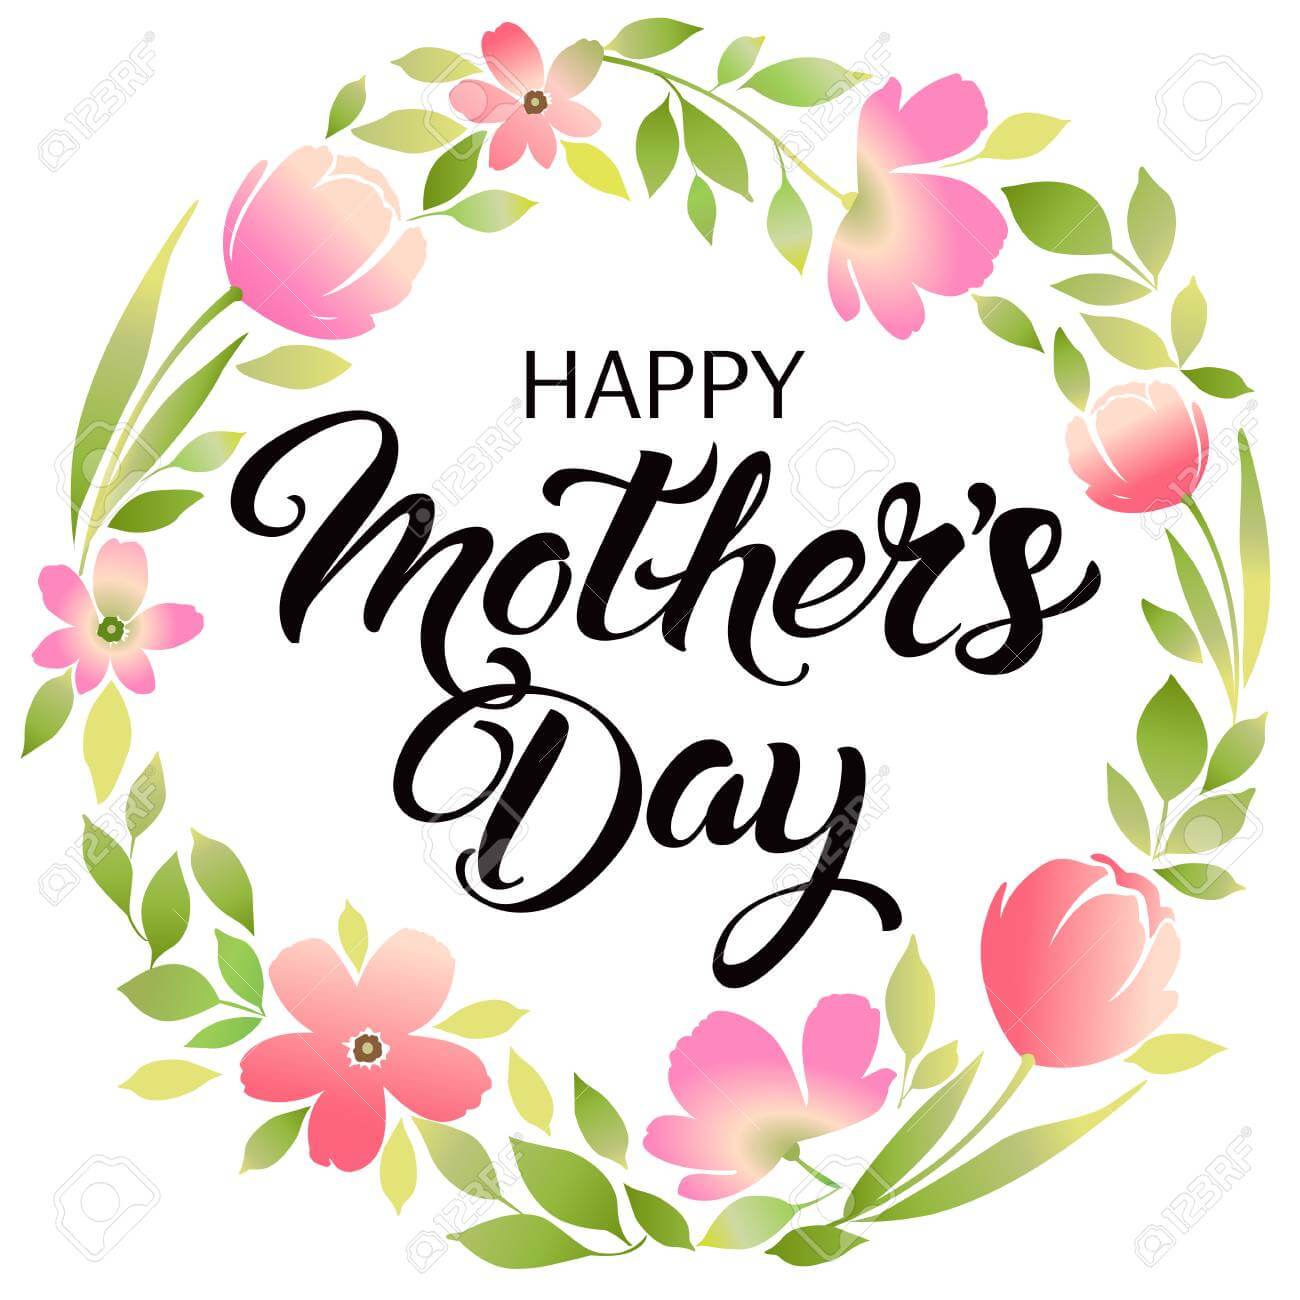 Happy Mothers Day Wishes Image_uptodatedaily